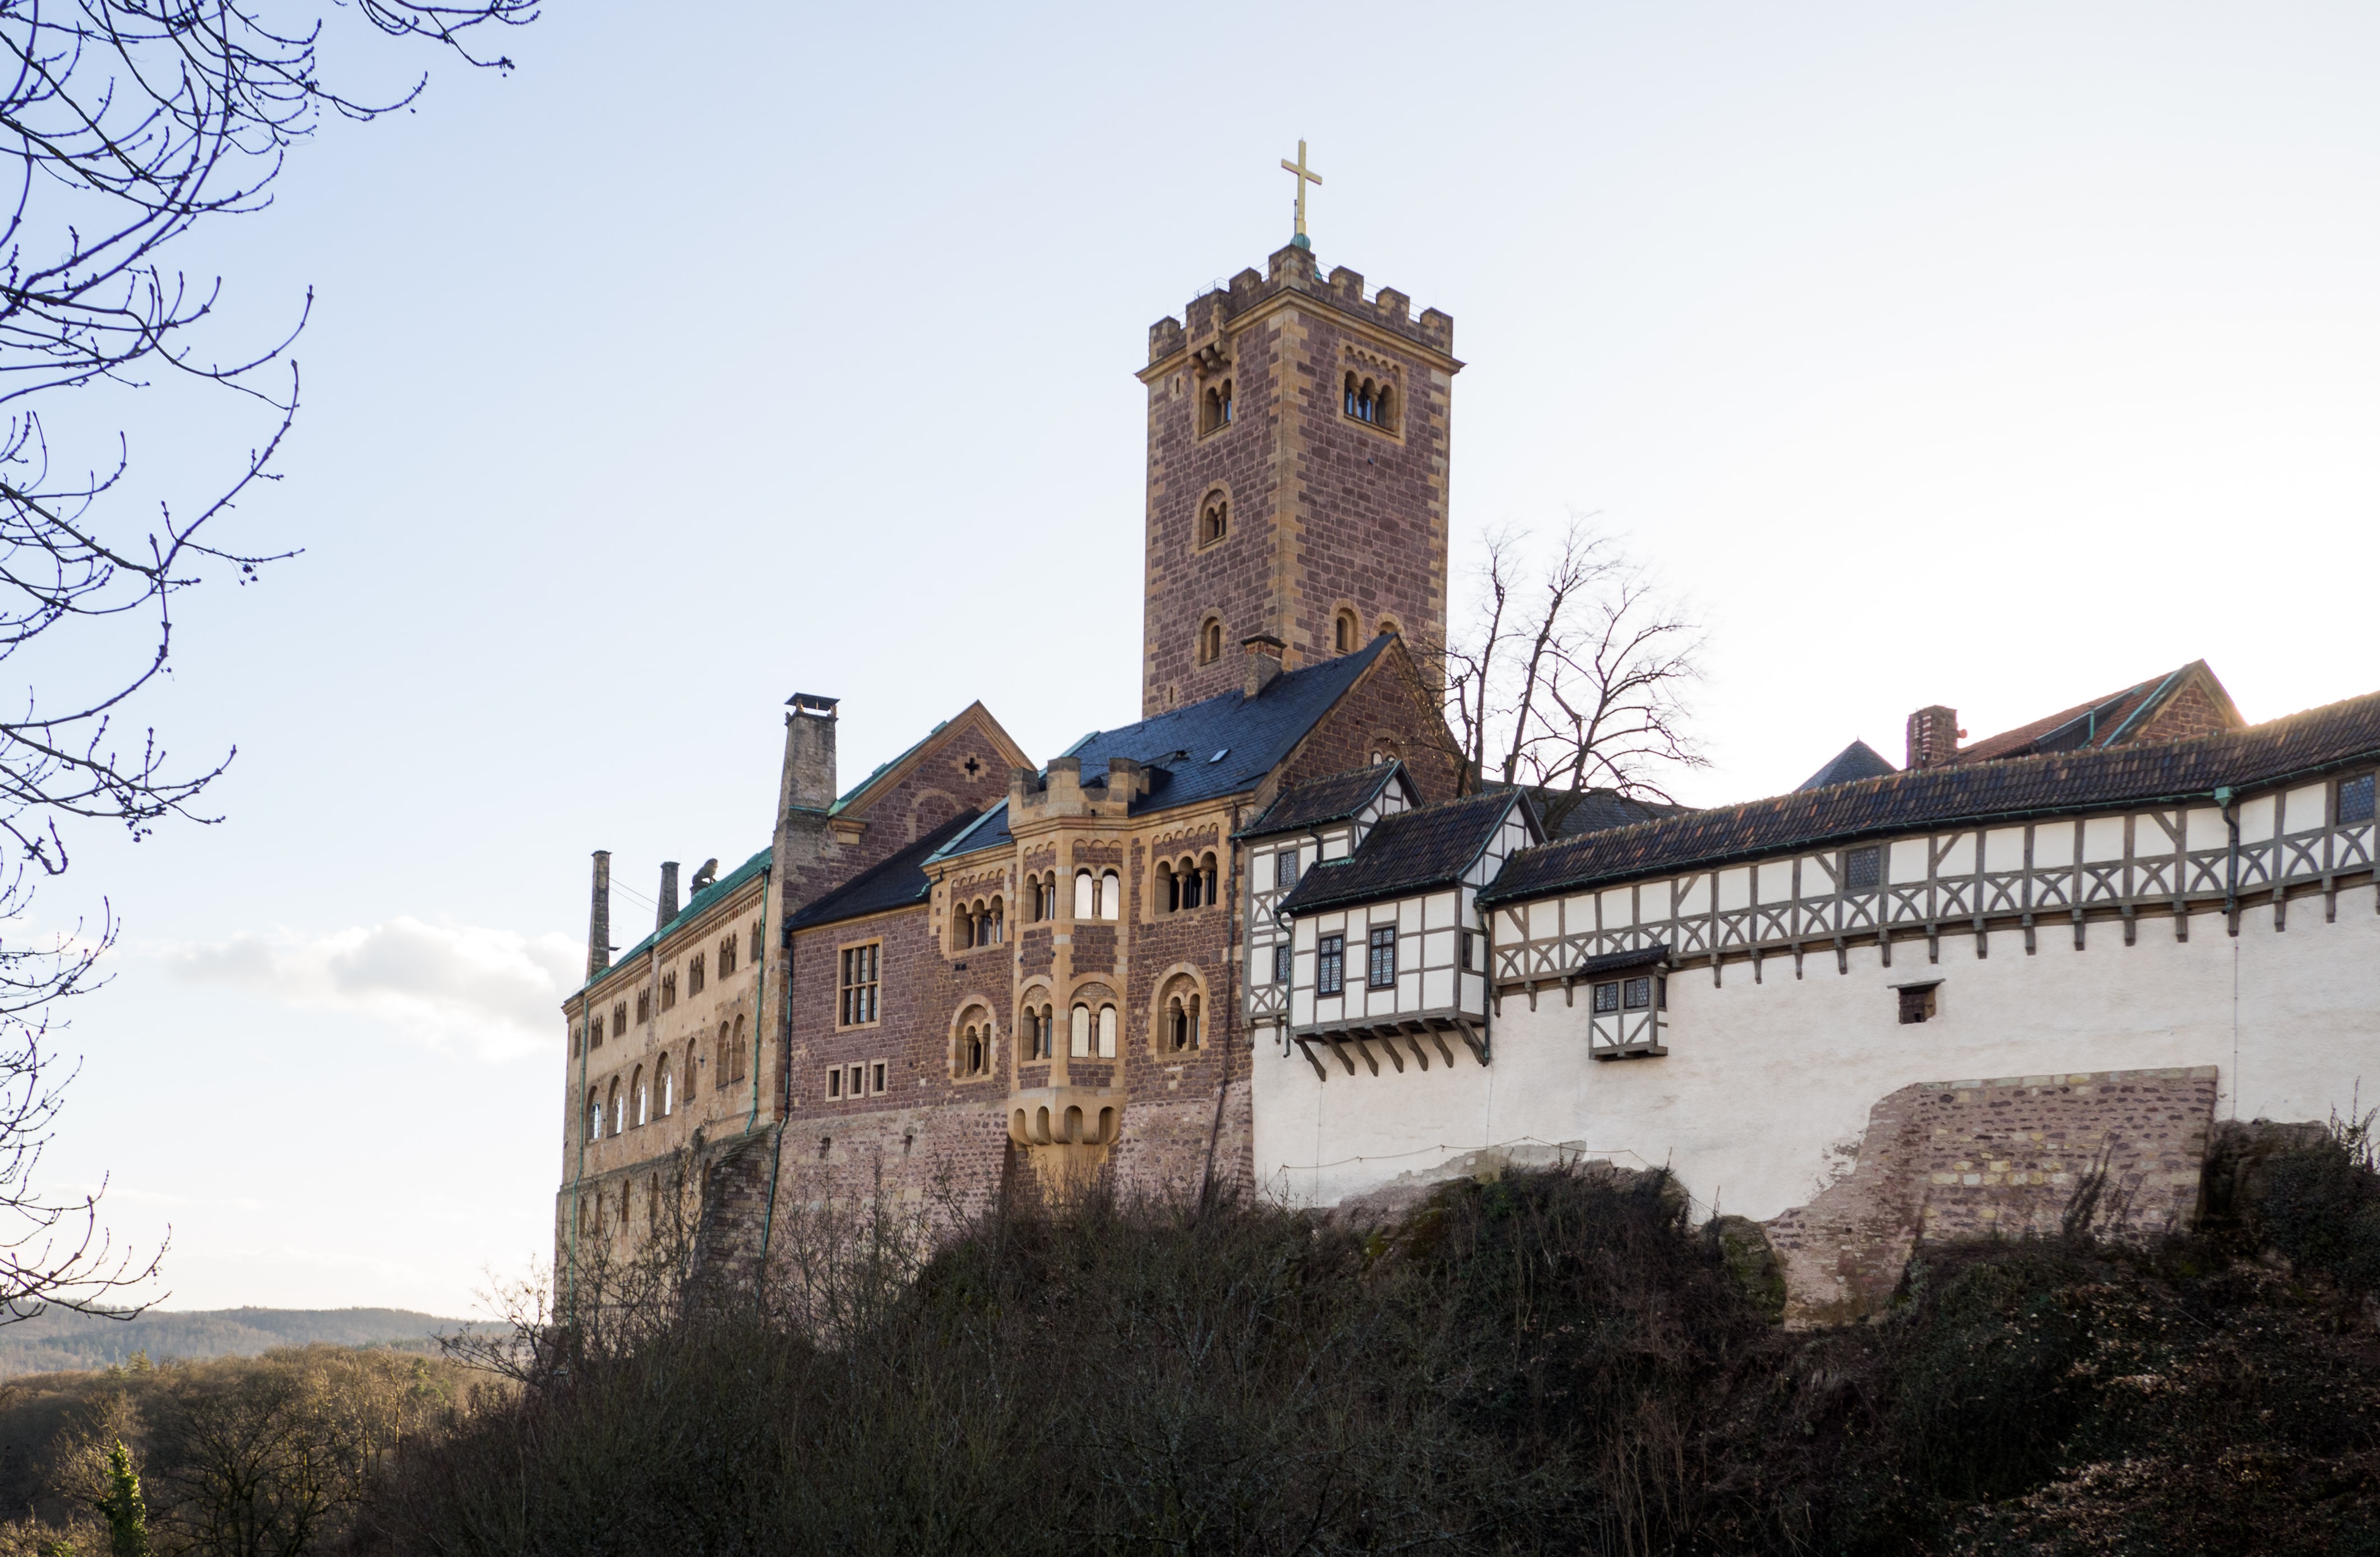 A magnificent medieval castle on a hill in Germany, where Martin Luther translated the new testament